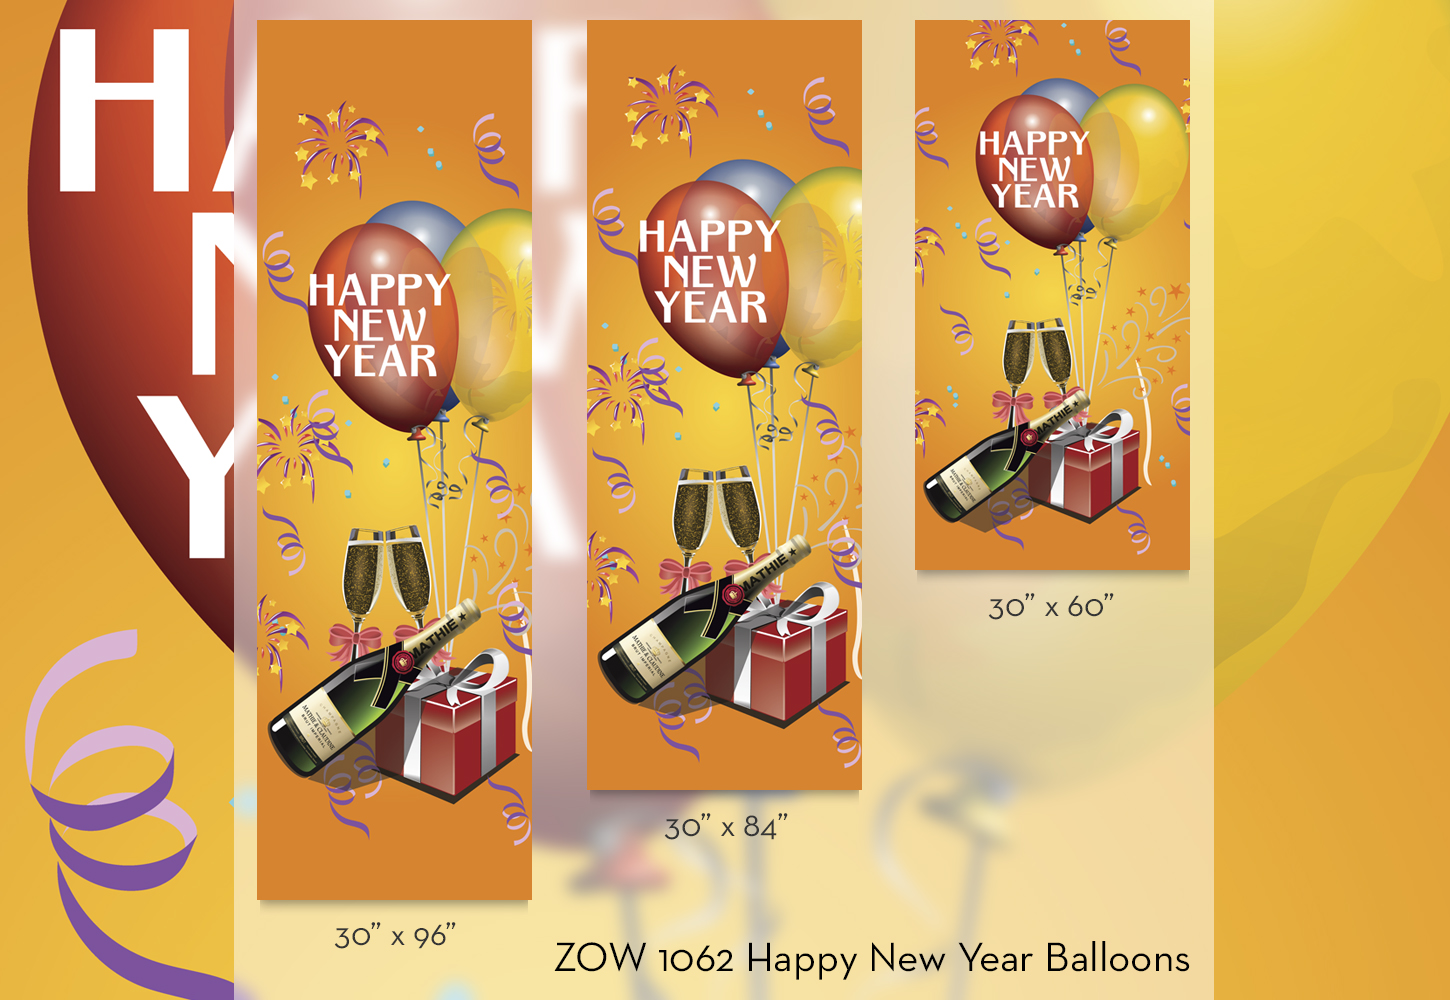 ZOW 1062 Happy New Year Balloons